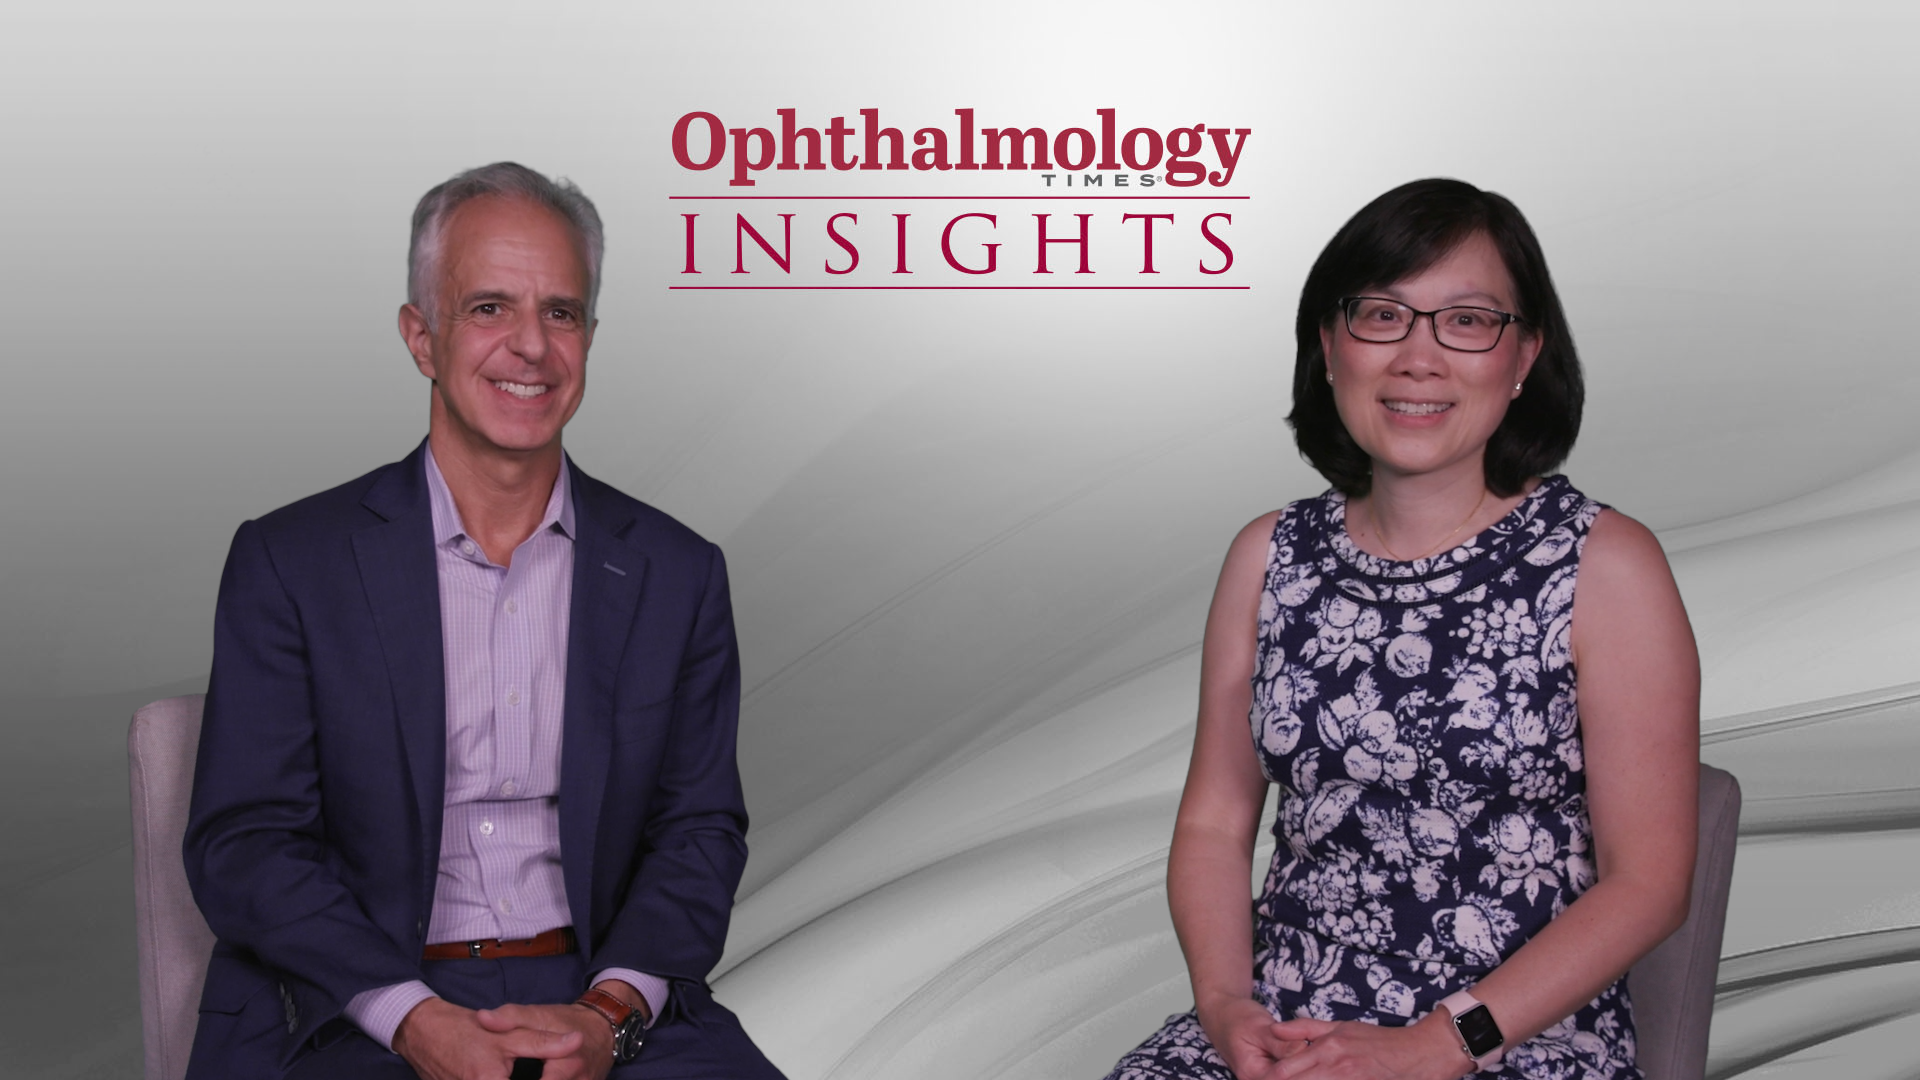 Updates in the Use of Biosimilars in the Management of Retinal Eye Disorders